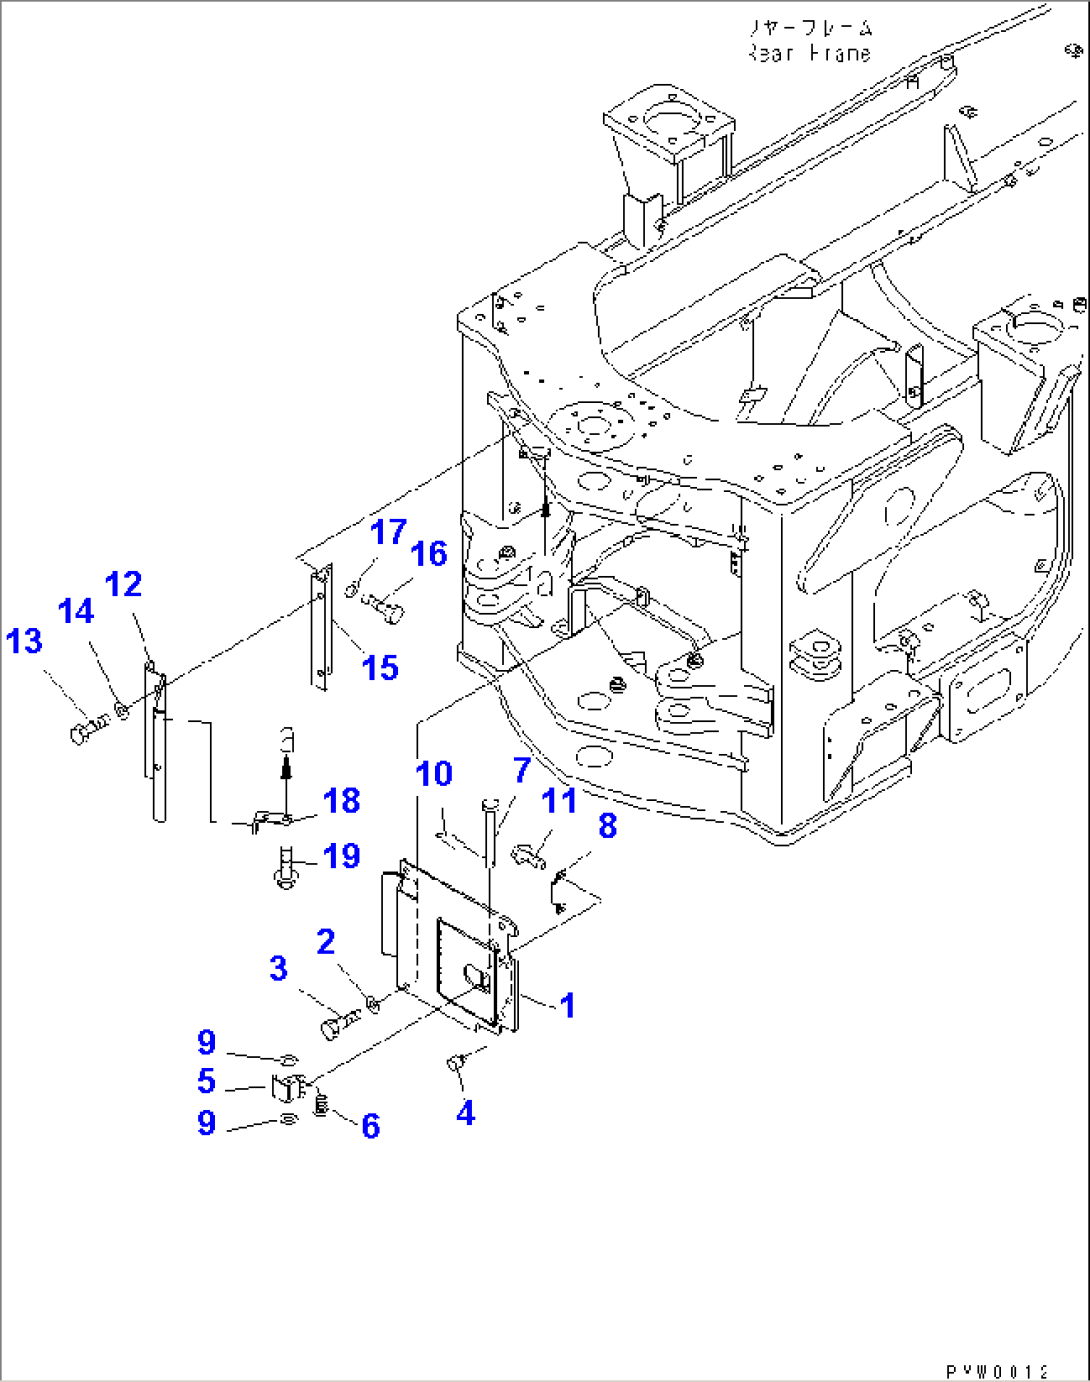 LOCK AND COVER (REAR FRAME COVER)